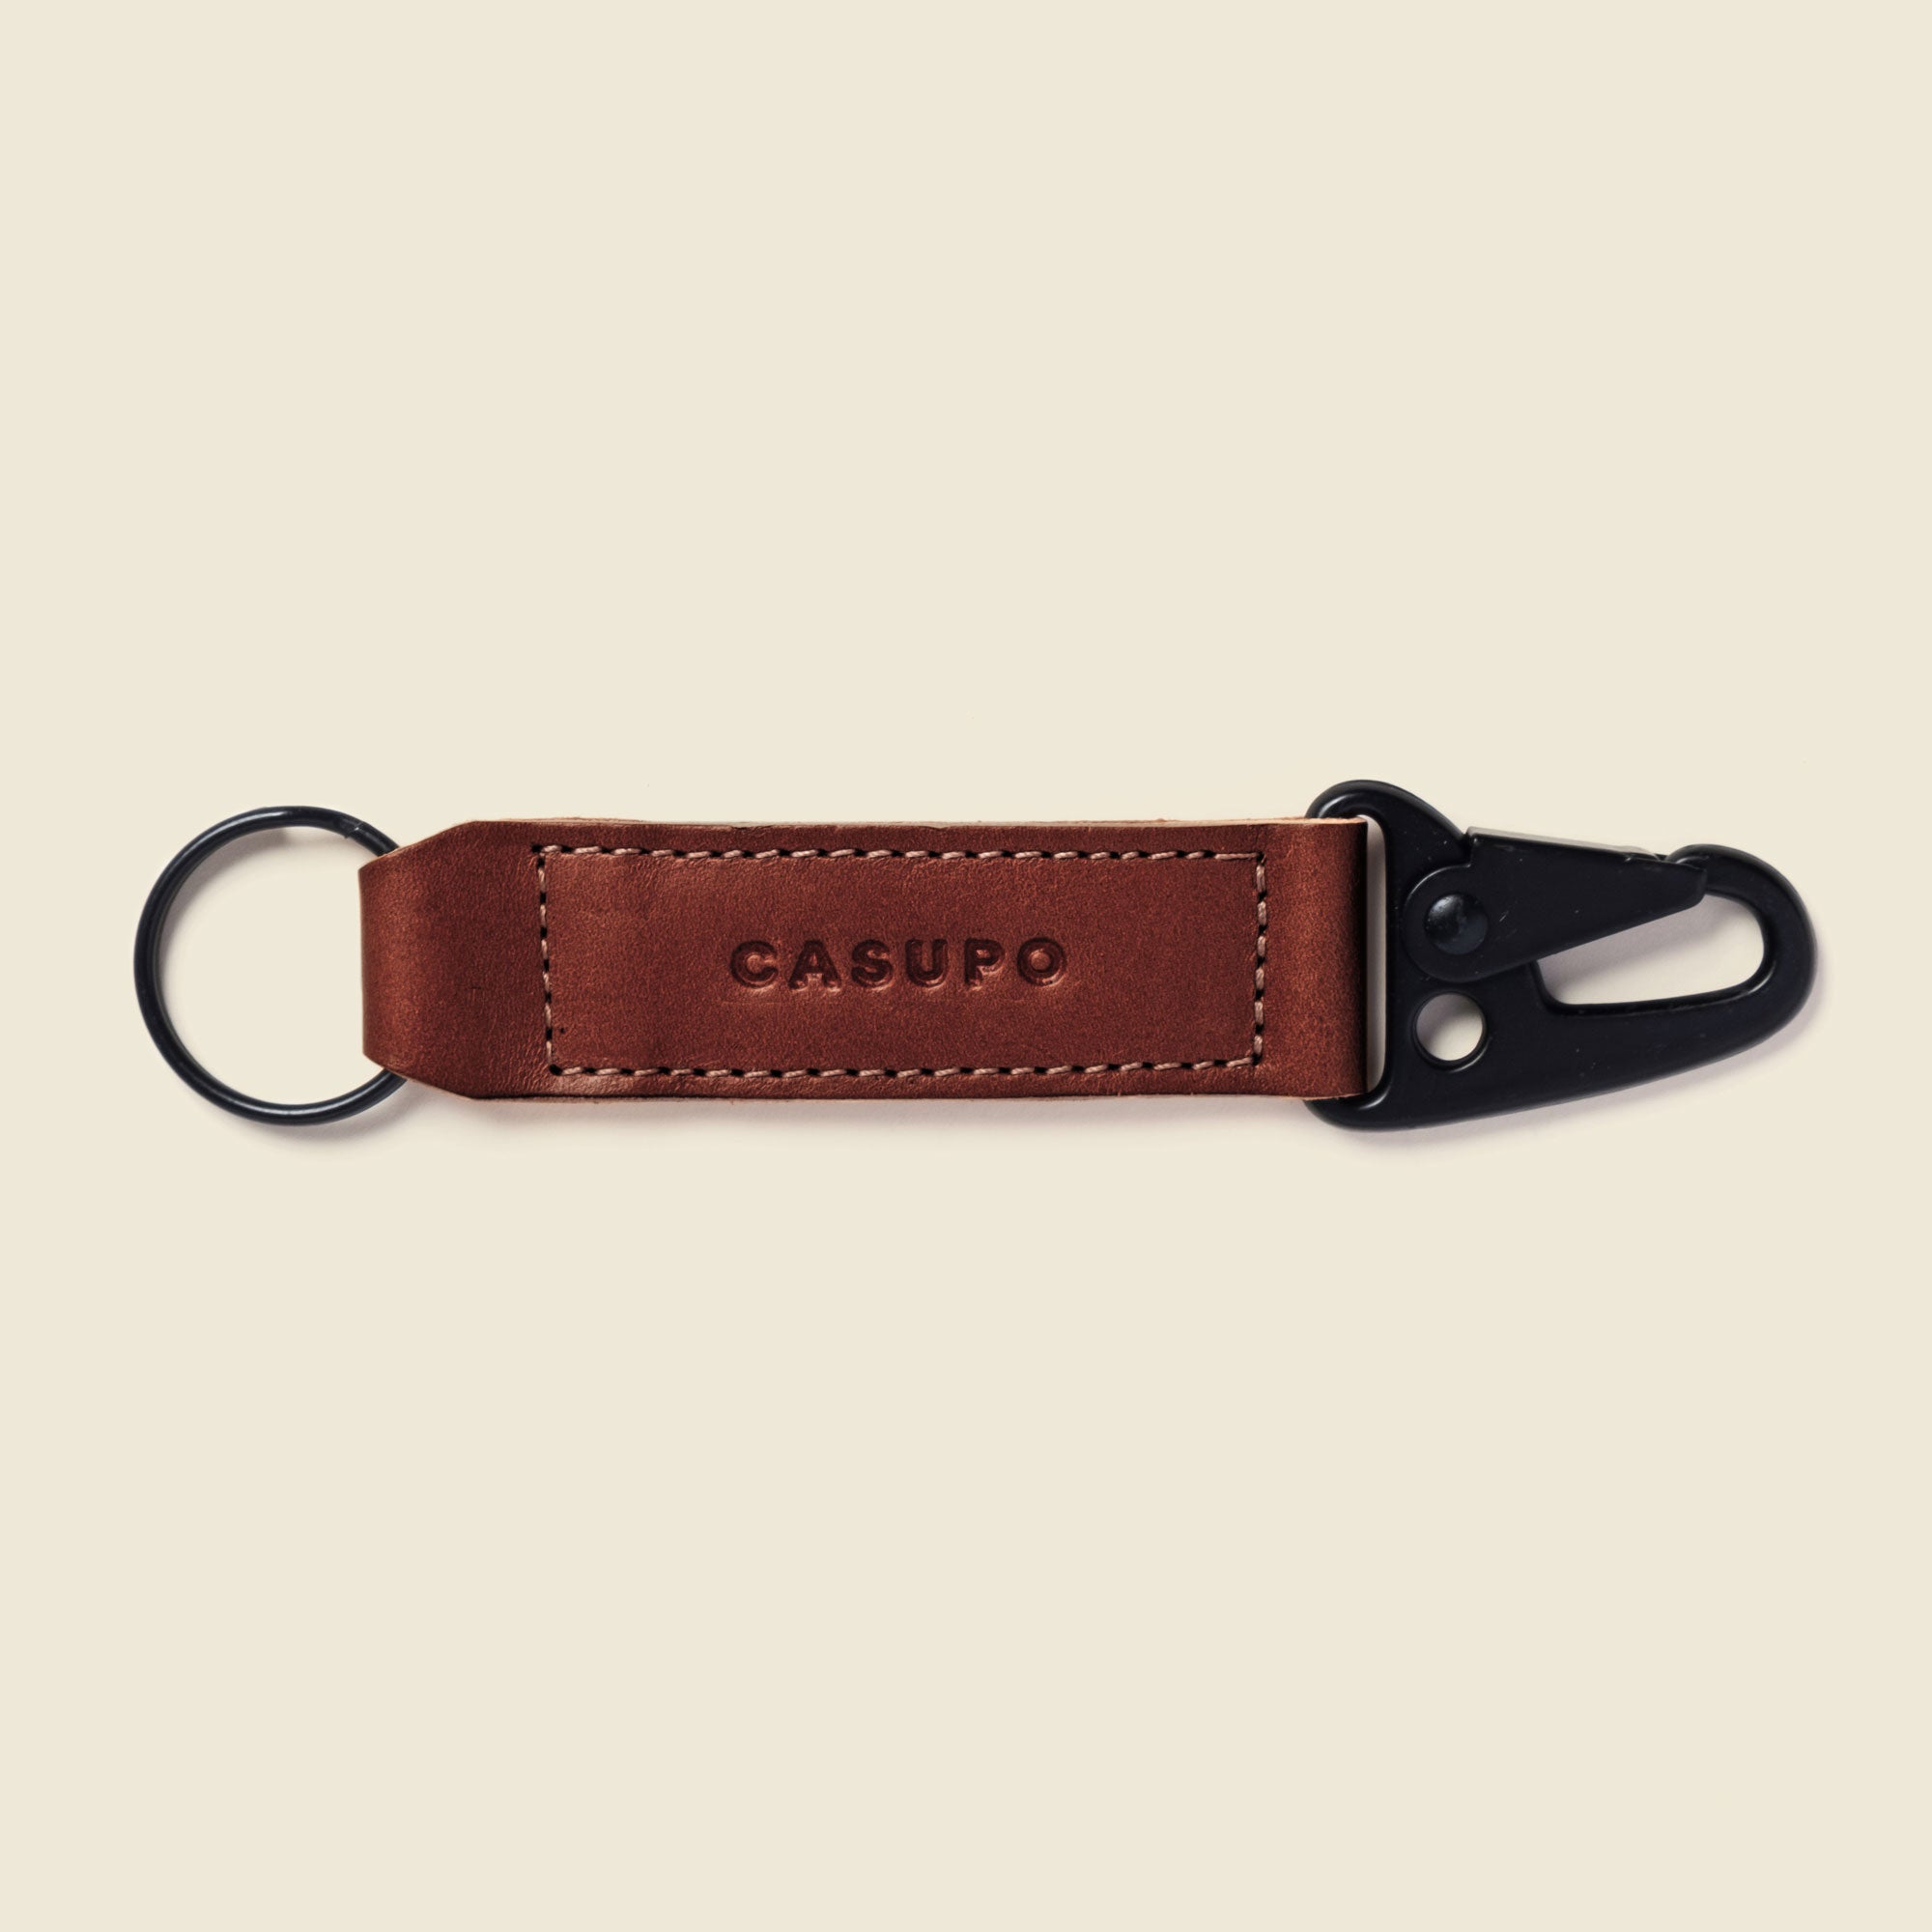 Hipster brown leather keychain with black hardware for men